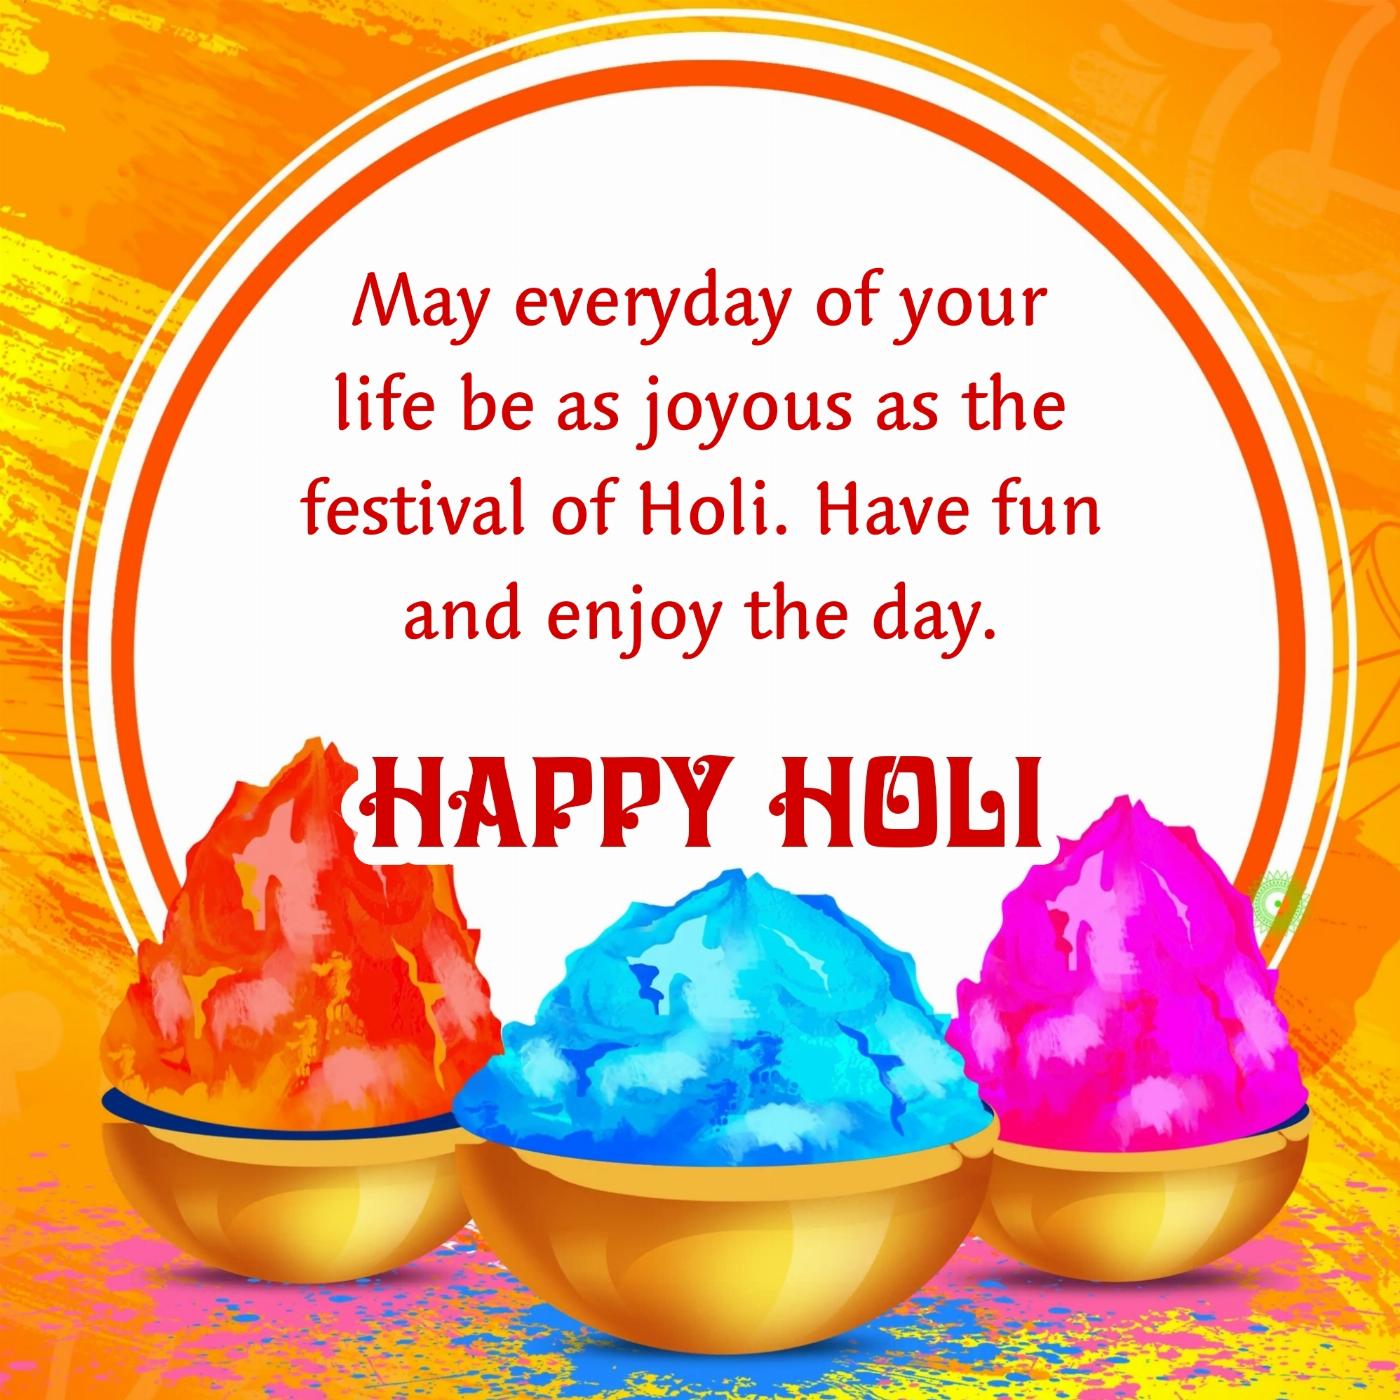 May everyday of your life be as joyous as the festival of Holi